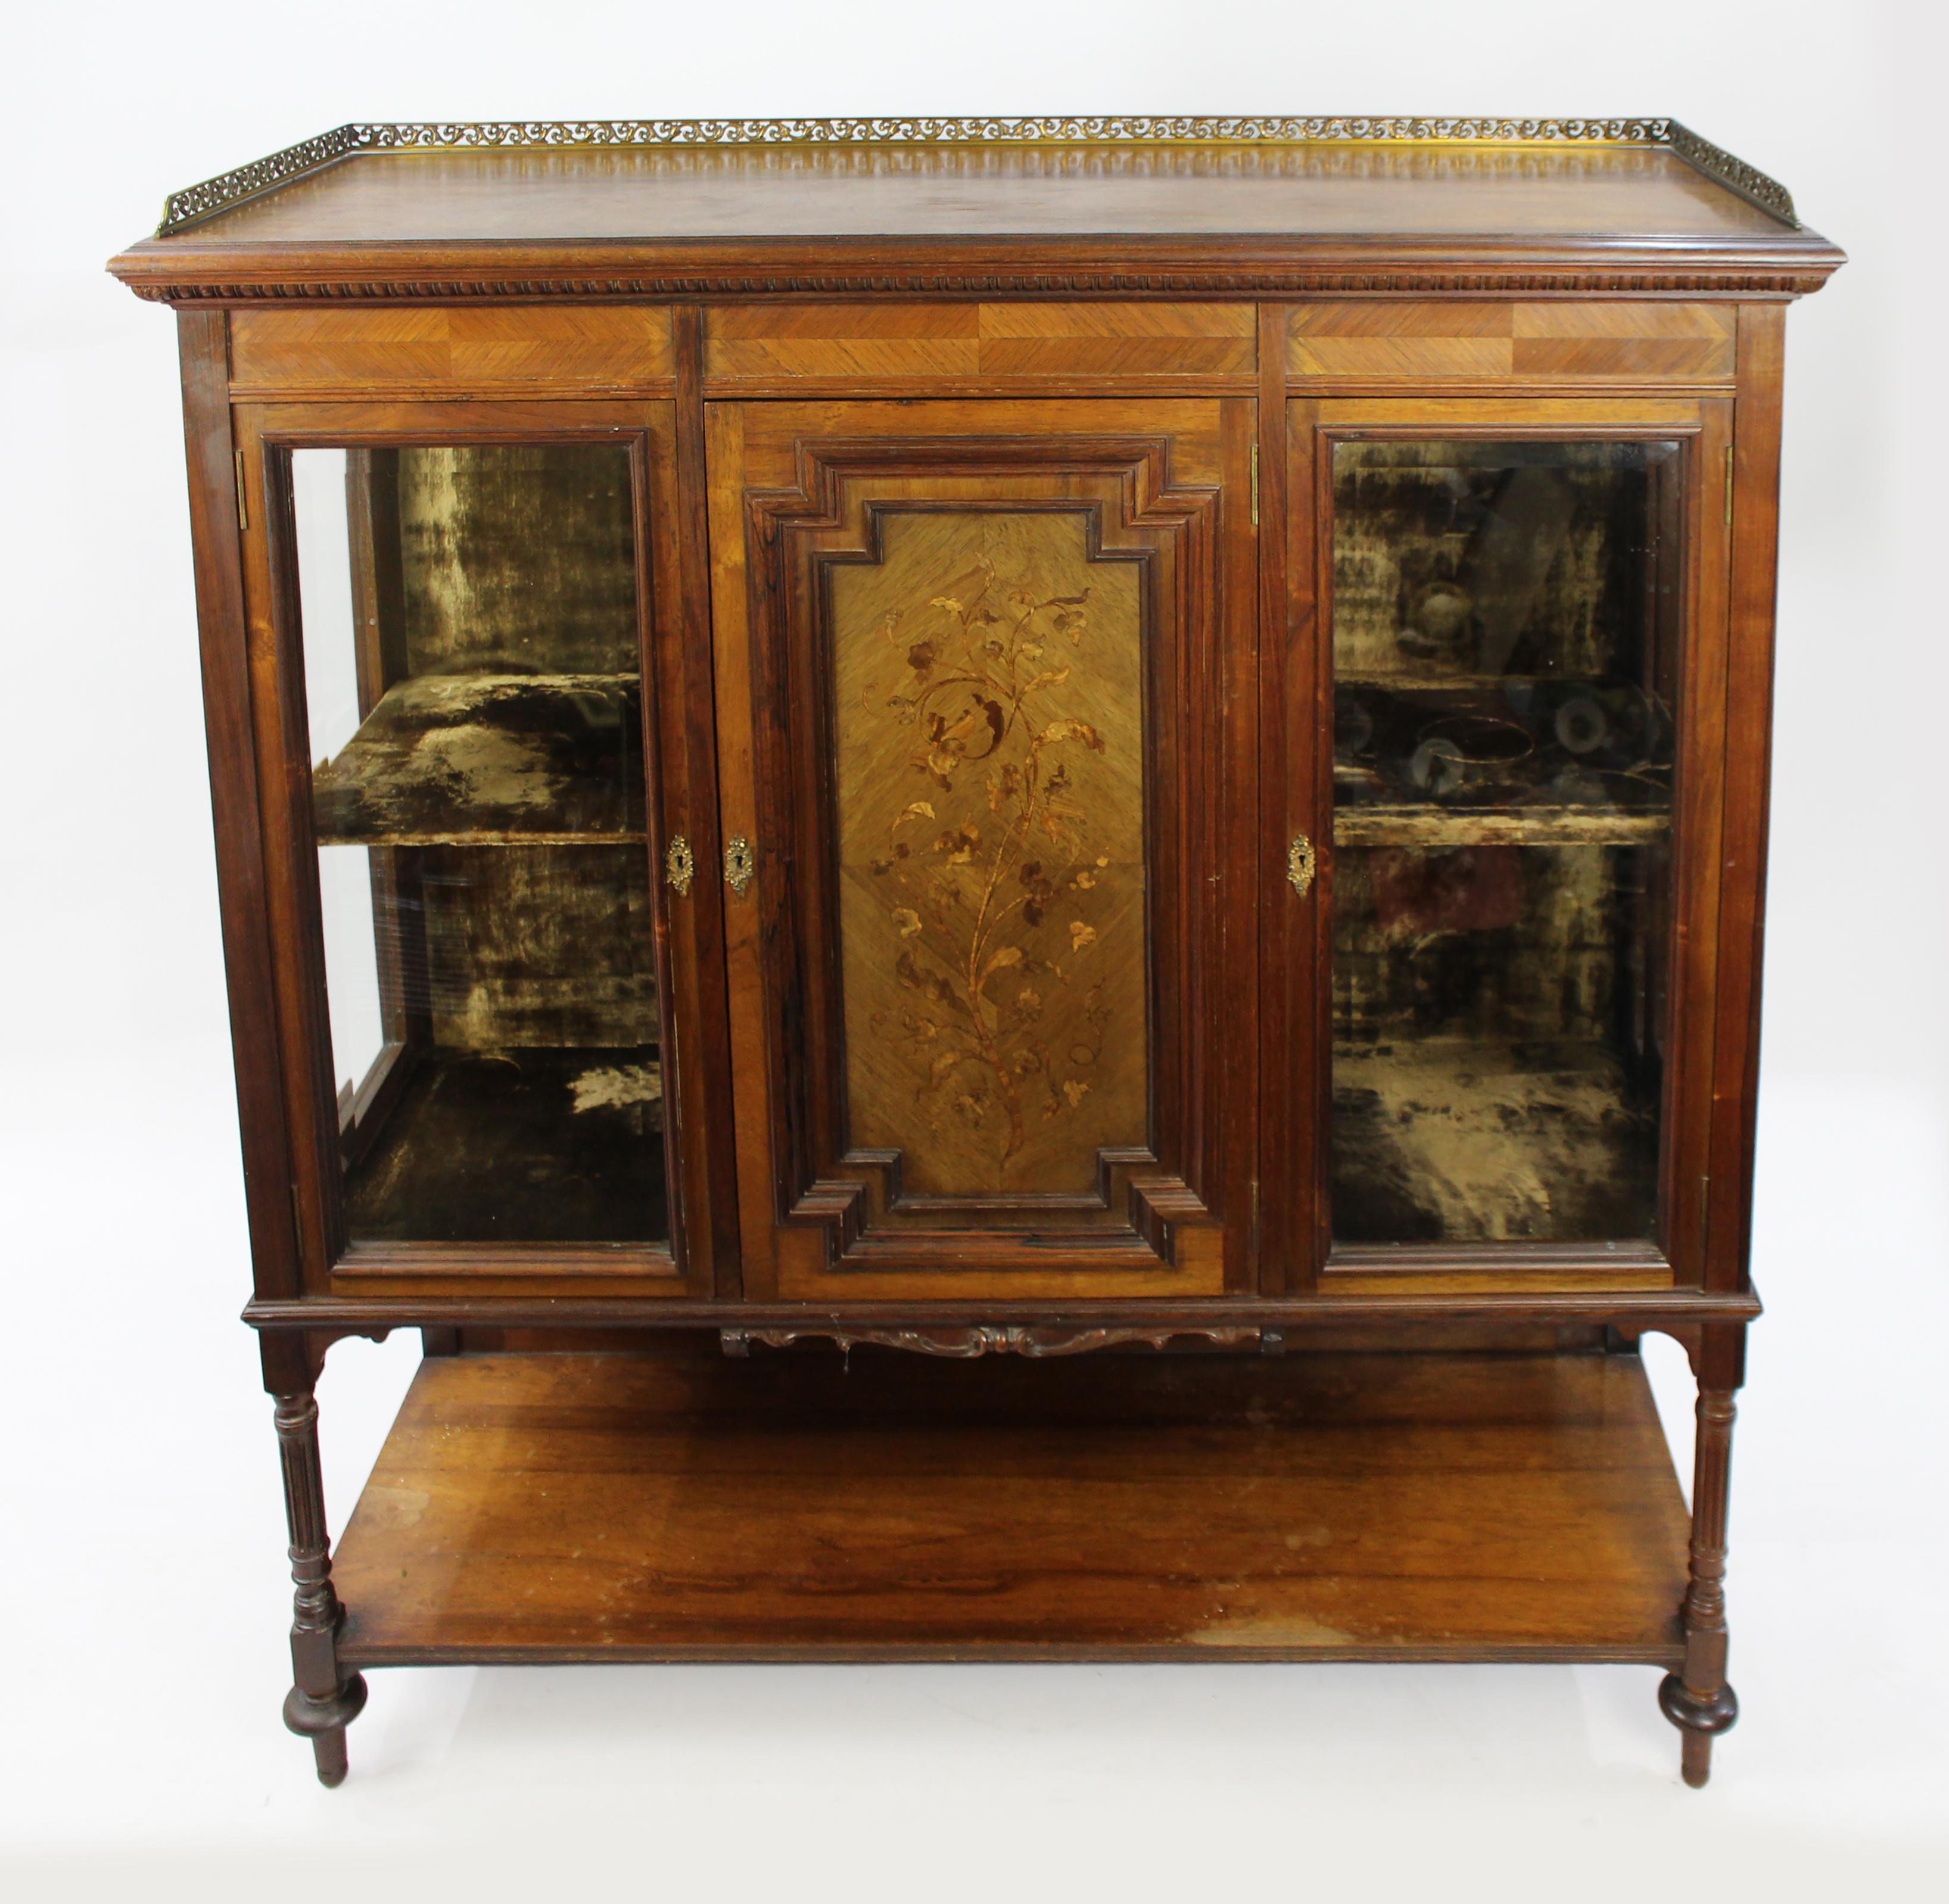 Late Victorian inlaid rosewood display cabinet

Measures: Width 122 cm 4 ft
Depth 45.5 cm 18 in
Height 130 cm 51 1/4 in
 
Period Victorian, English, c.1890

Wood rosewood, inlaid

Condition offered in good original condition. Sound